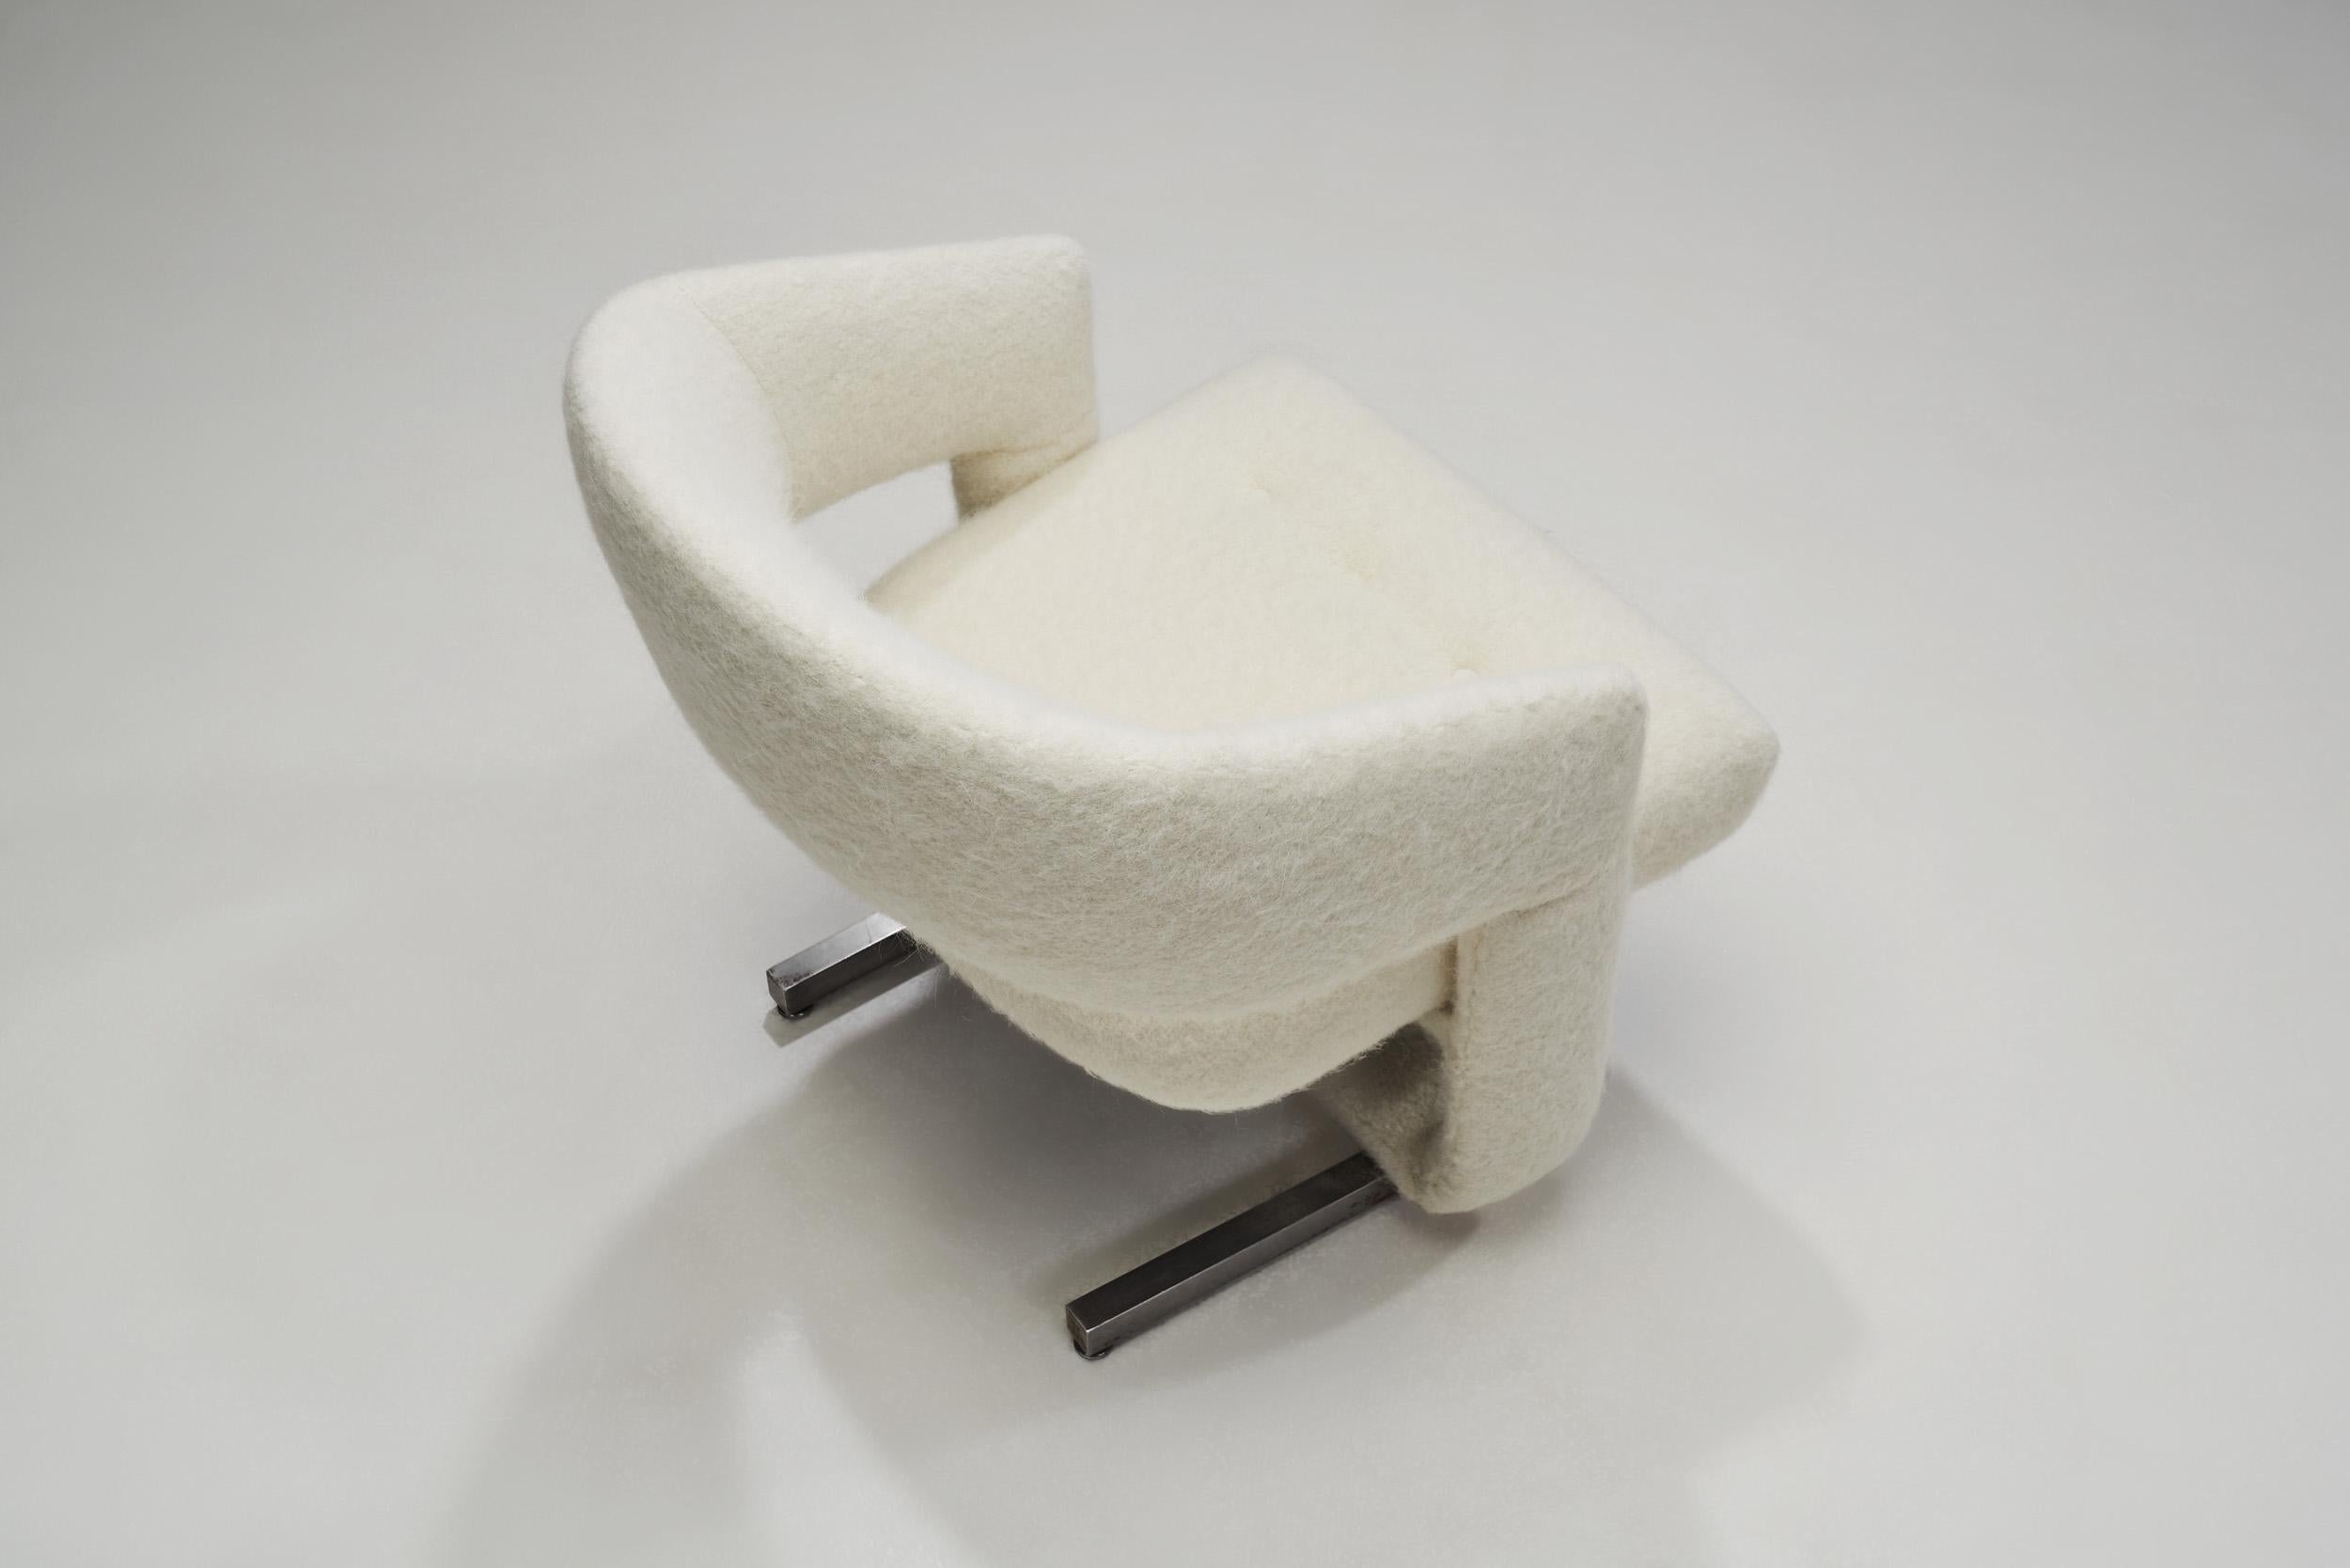 Sculptural Accent Chairs with Metal Legs, Europe ca 1960s For Sale 2